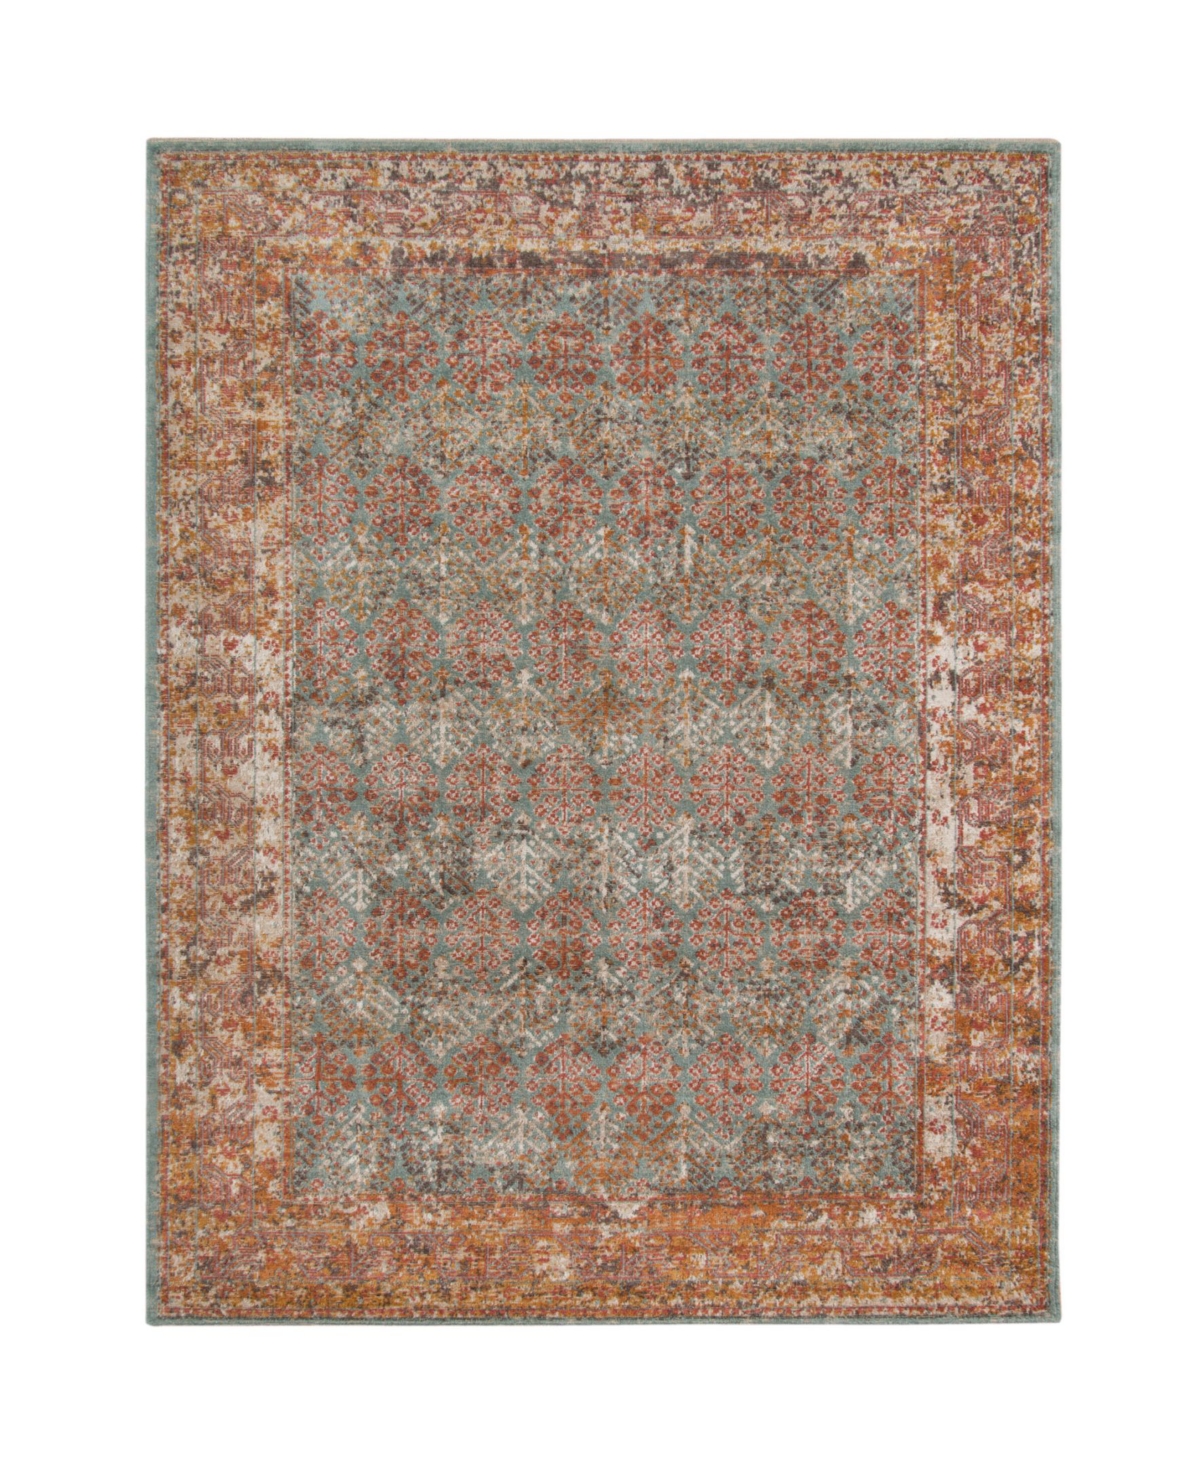 AMER RUGS ETERNAL ETE-15 TURQUOISE 5'7" X 7'6" AREA RUG